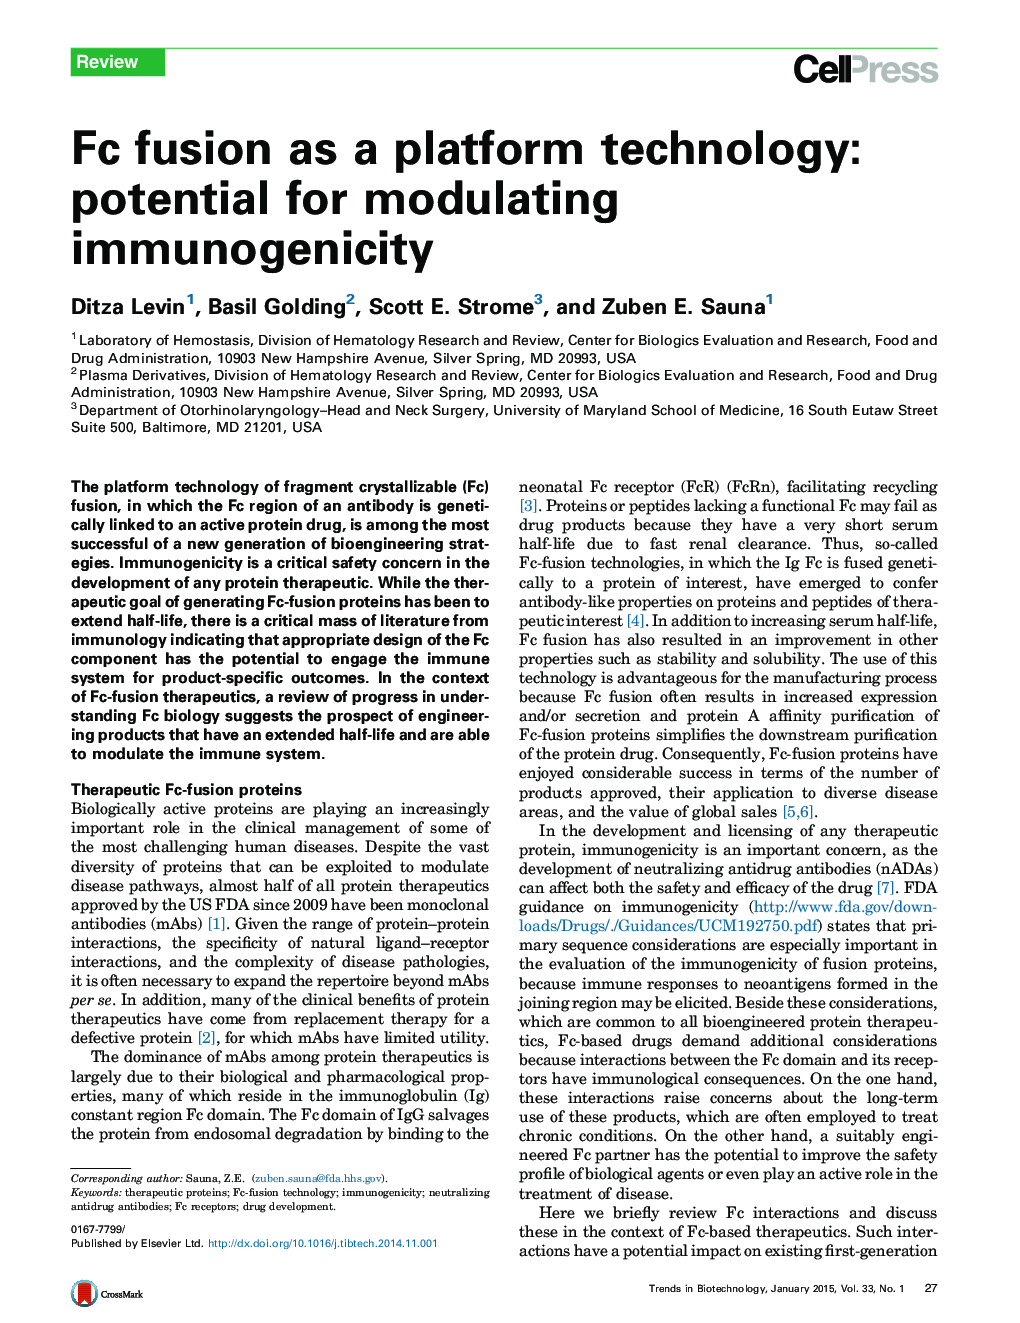 Fc fusion as a platform technology: potential for modulating immunogenicity